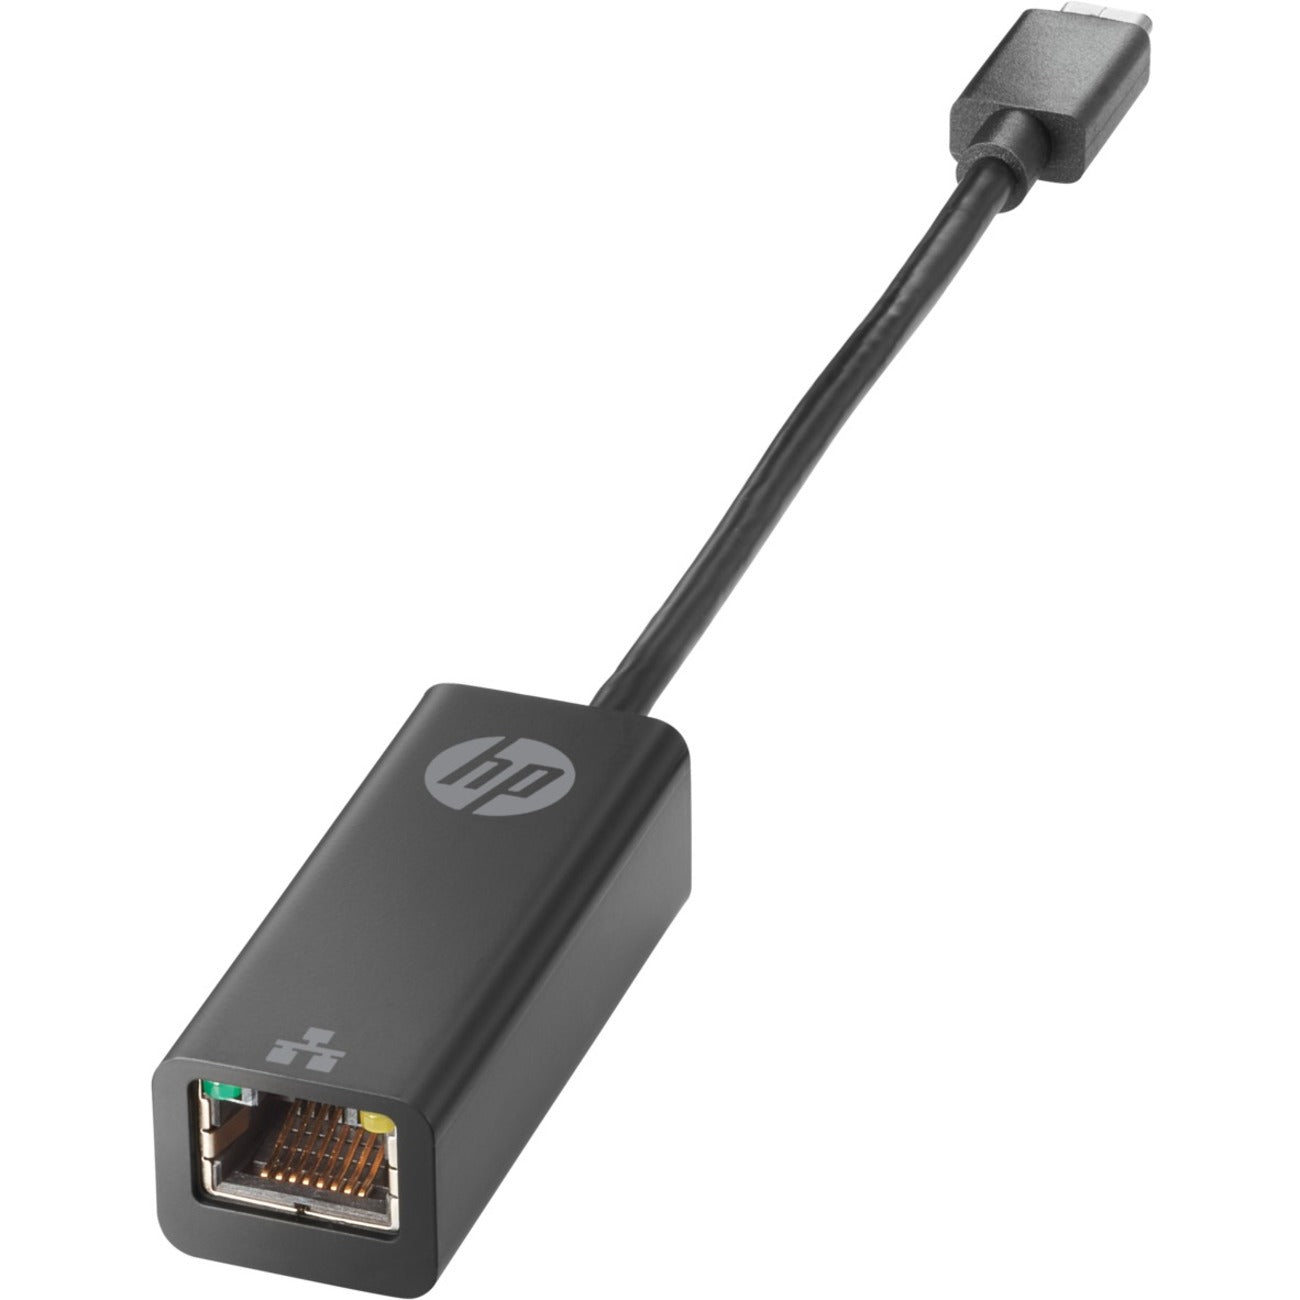 HP USB-C to RJ45 Adapter, Ethernet Adapter for Fast and Reliable Internet Connection